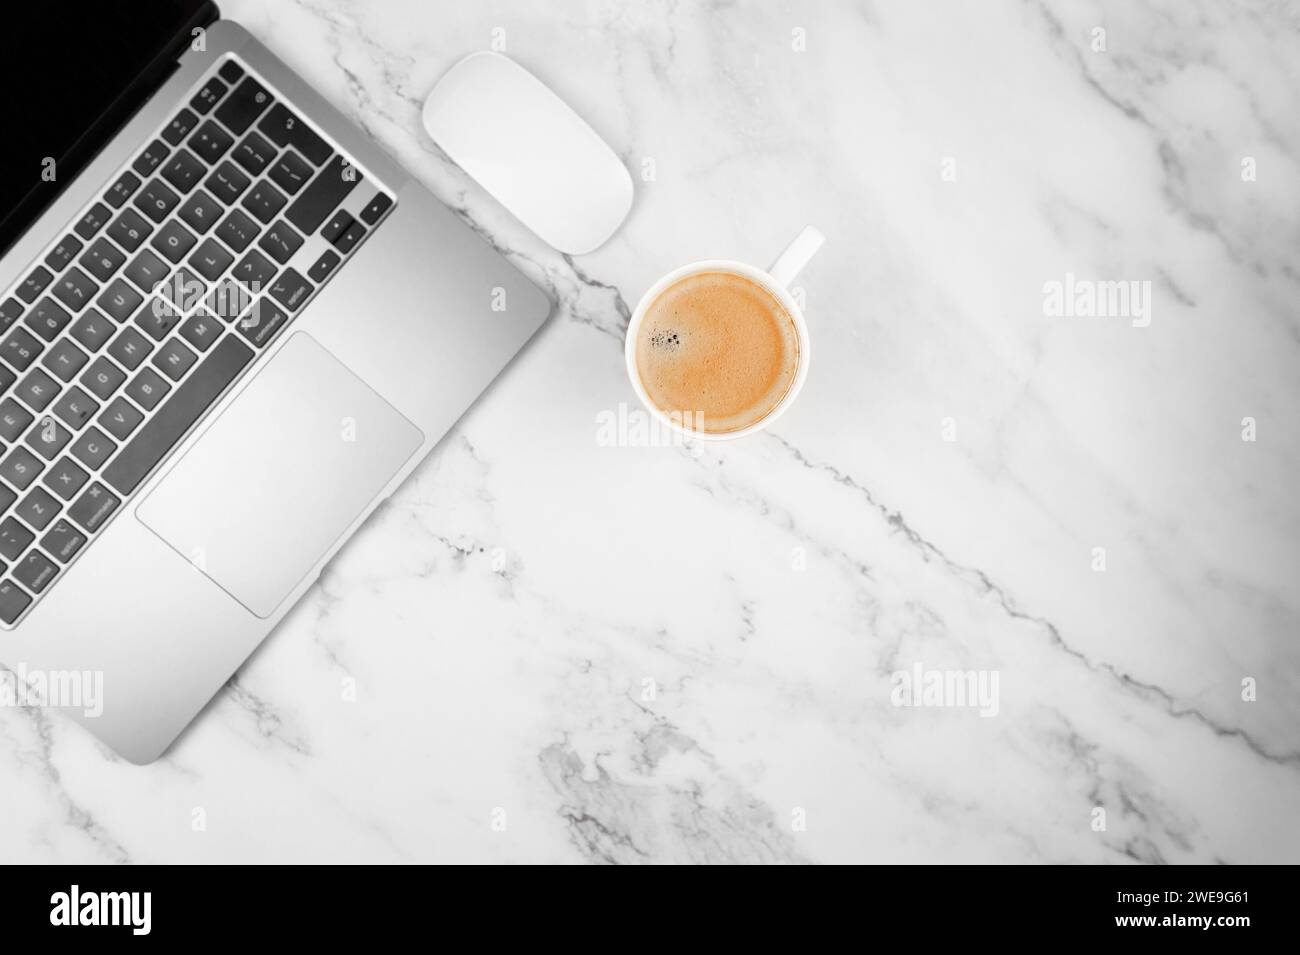 Top view of grey laptop computer on white marble background. Coffee cup, white mouse, flat lay, copy space. Stock Photo